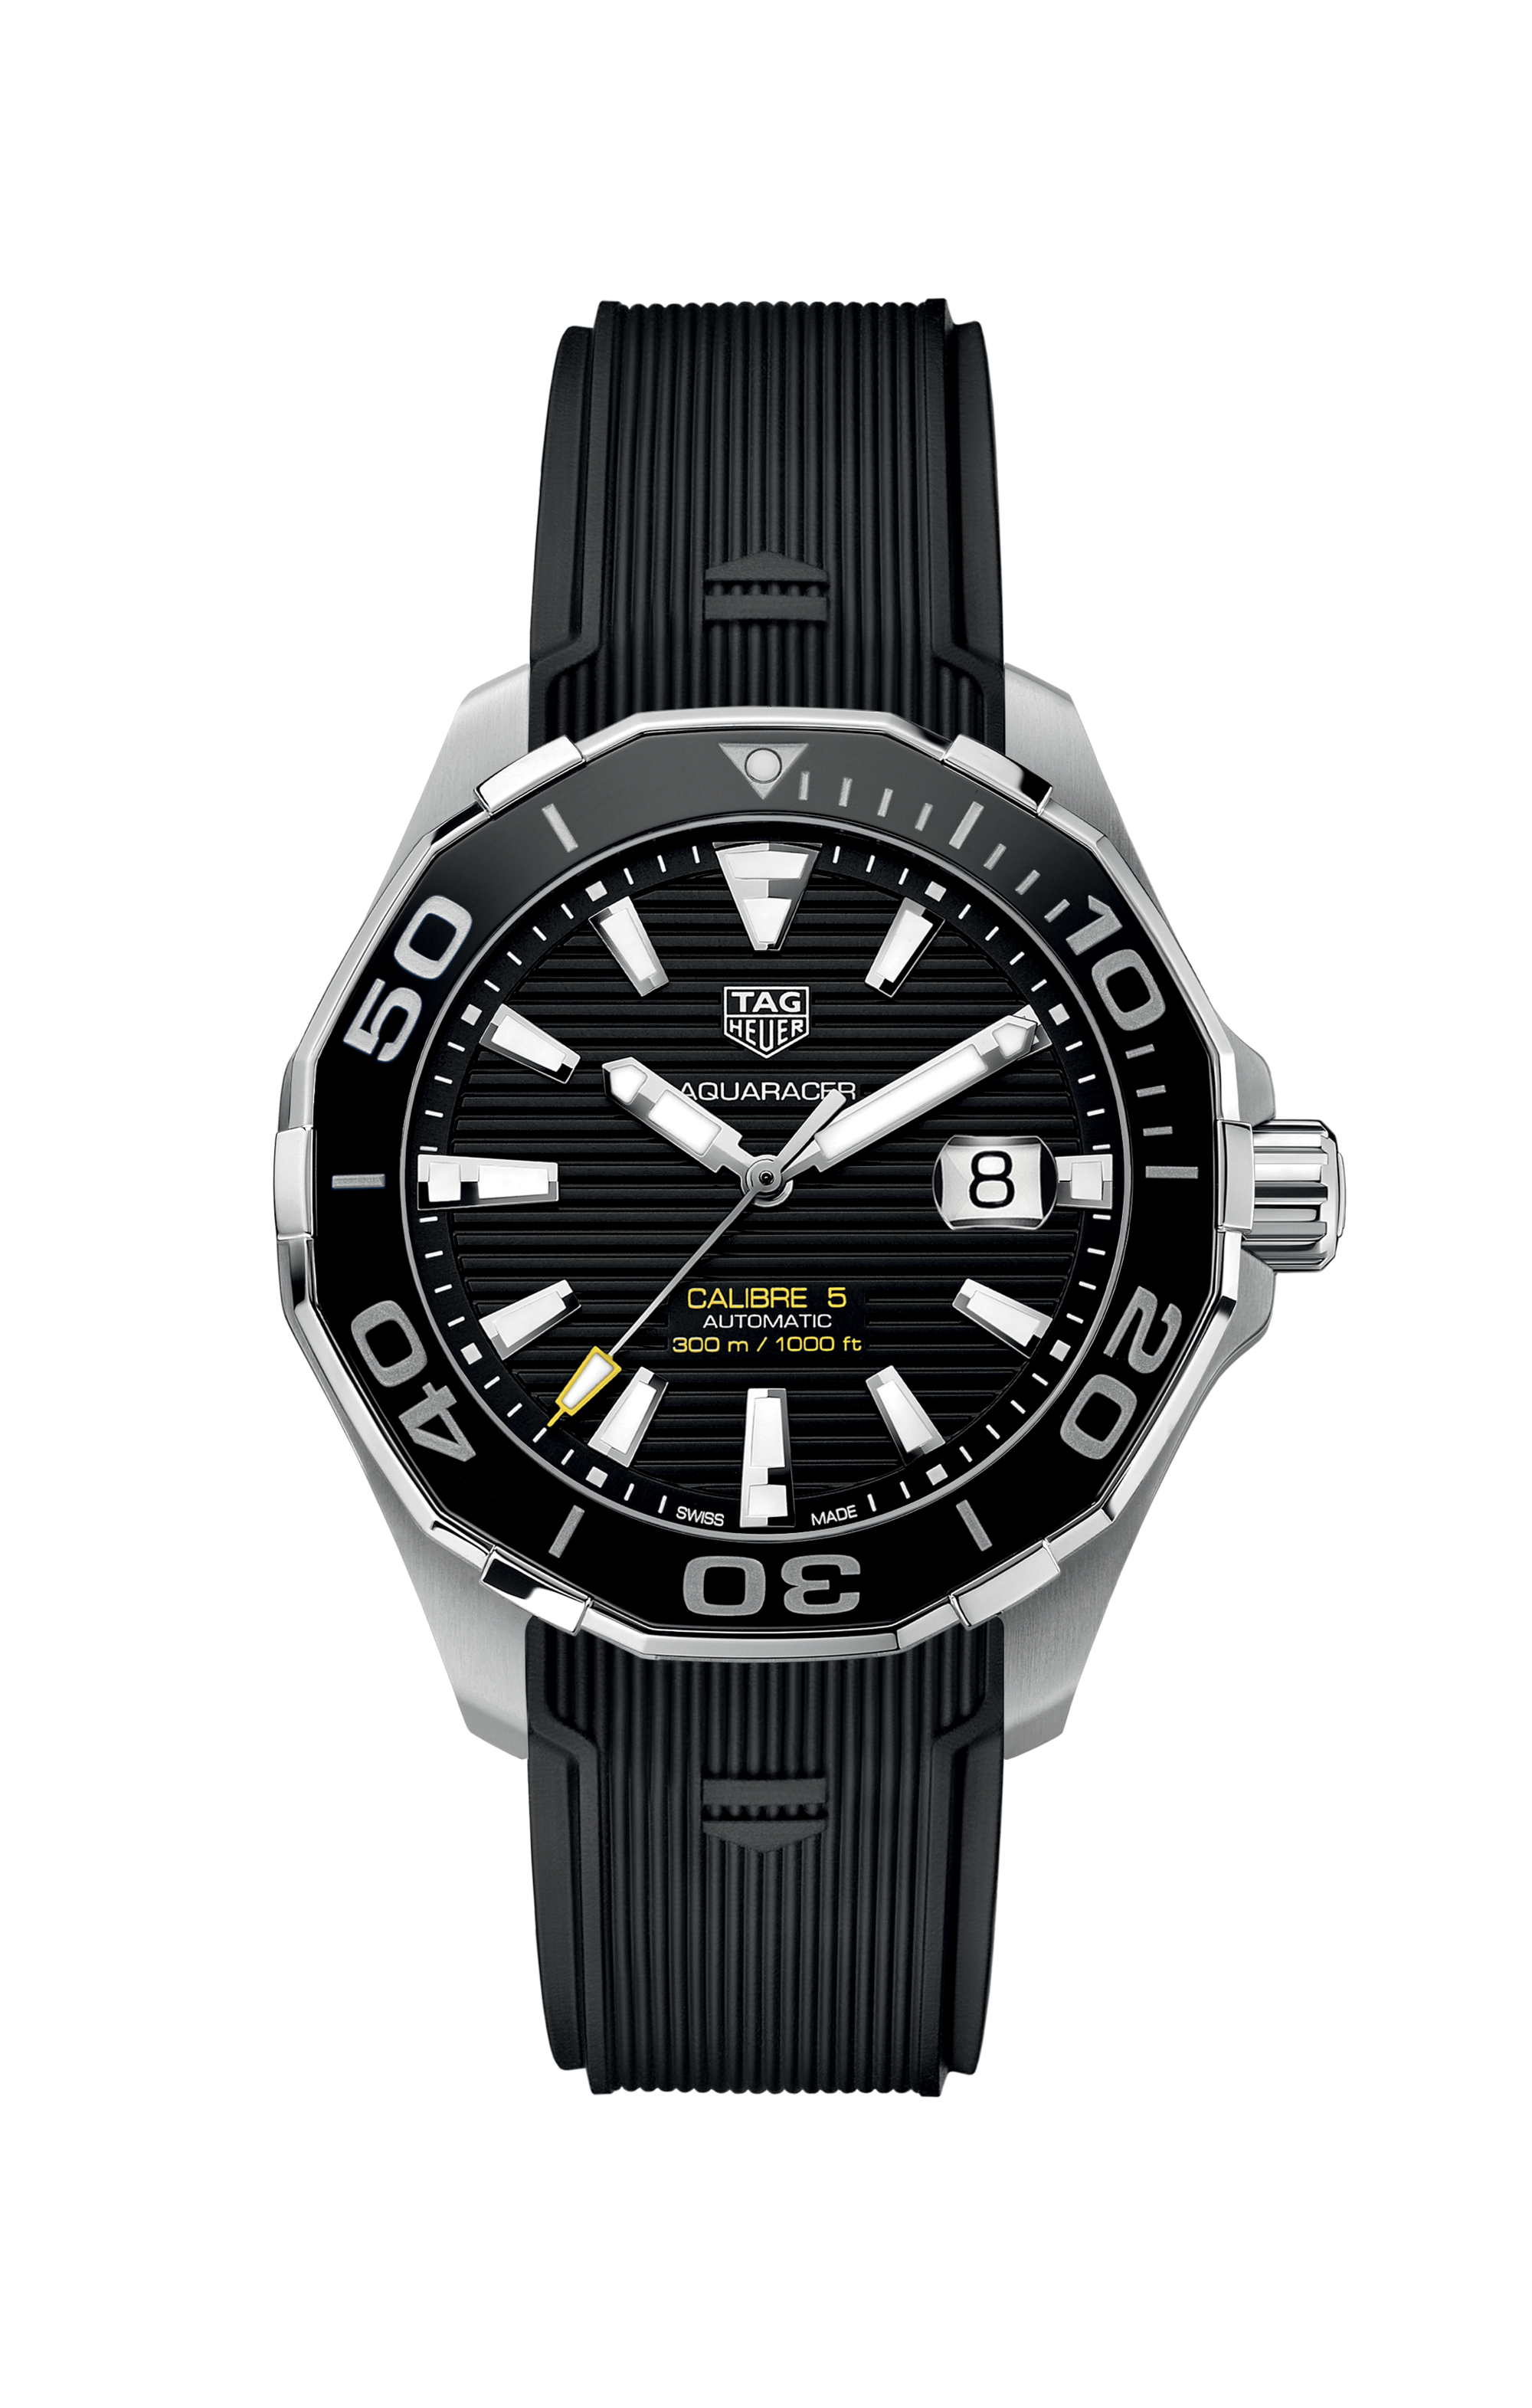 TAG Heuer Good Product [TAG HEUER] TAG Heuer Aquaracer Ogasawara Islands 500 Pieces Limited Model WAY2117 Automatic Winding Men's [ev15] [Used]